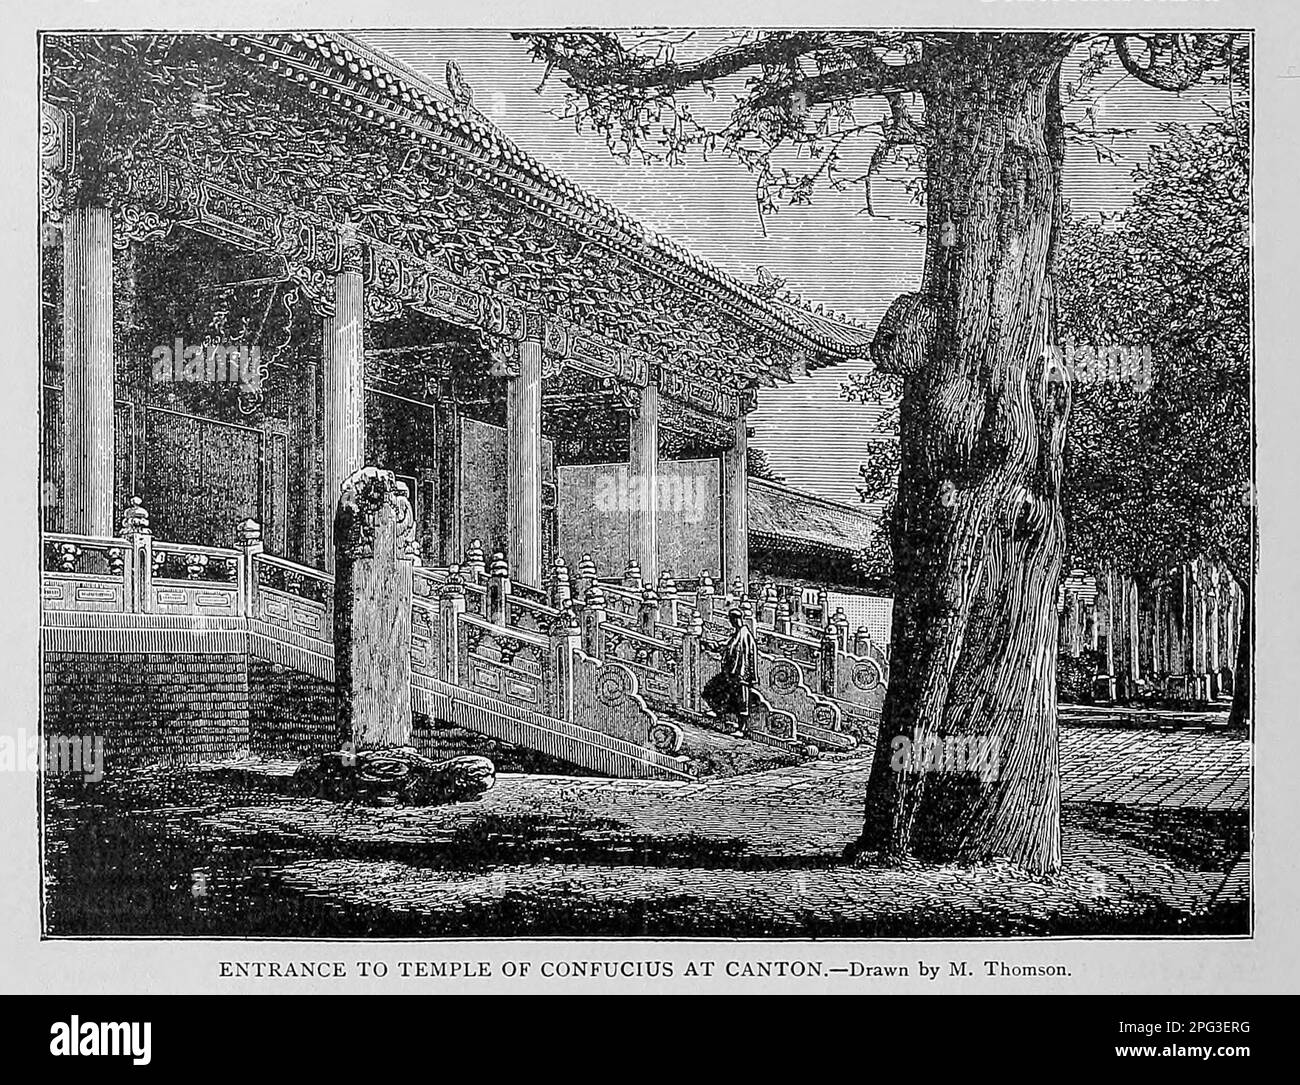 Entrance to Temple of Confucius at Canton. Drawn by M. Thomson from Cyclopedia universal history : embracing the most complete and recent presentation of the subject in two principal parts or divisions of more than six thousand pages by John Clark Ridpath, 1840-1900 Publication date 1895 Publisher Boston : Balch Bros. Volume 7 History of Man Stock Photo